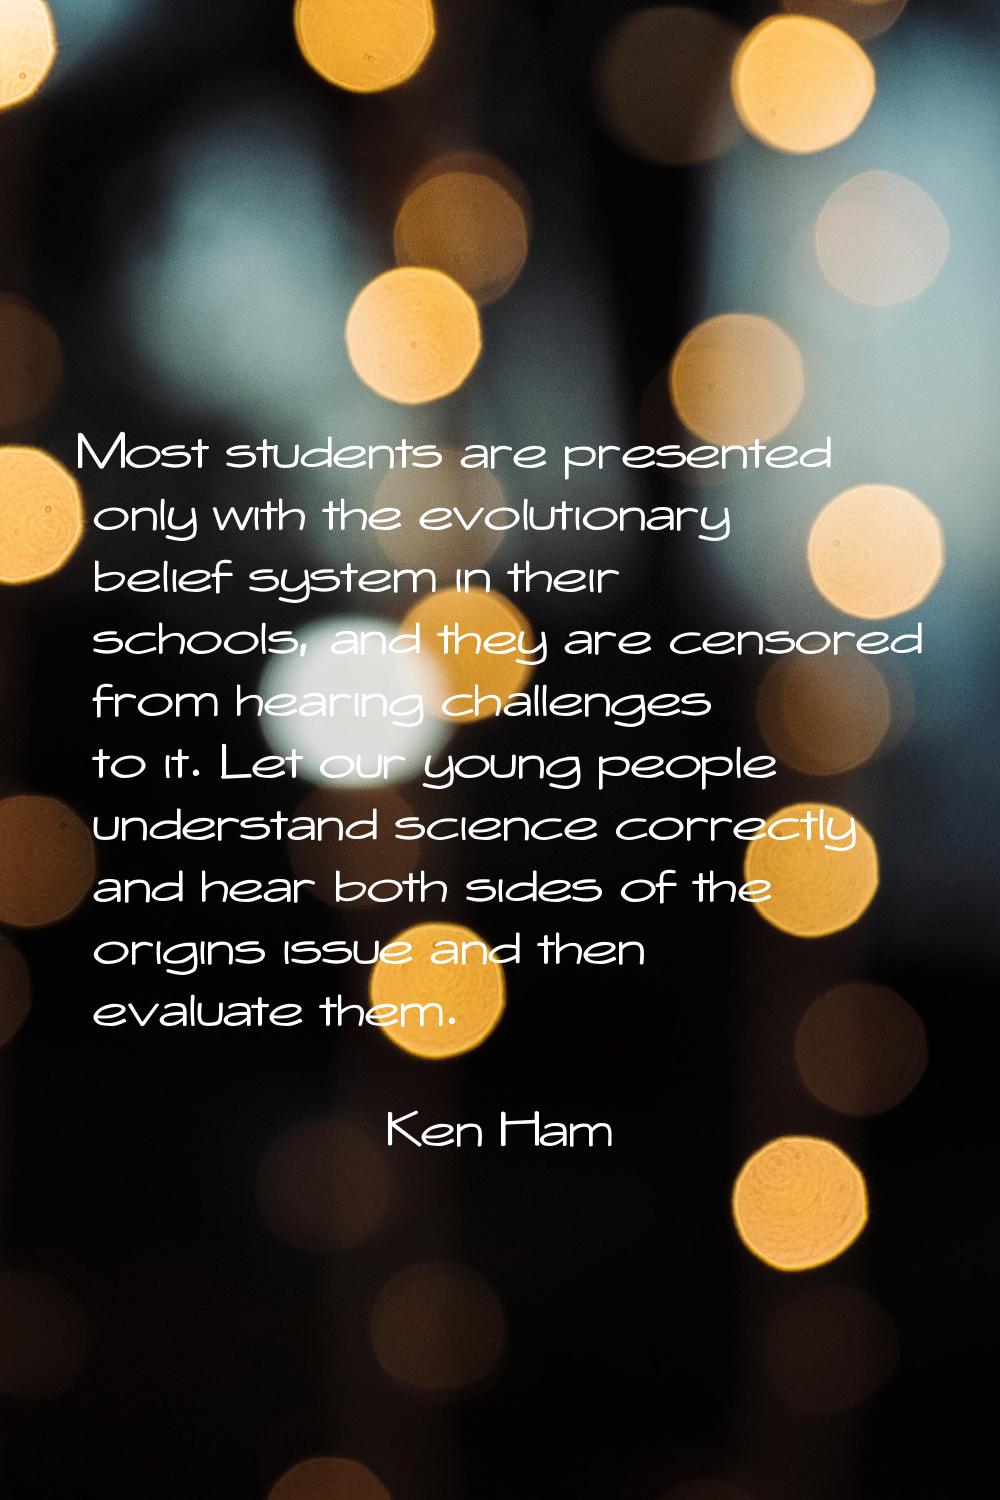 Most students are presented only with the evolutionary belief system in their schools, and they are